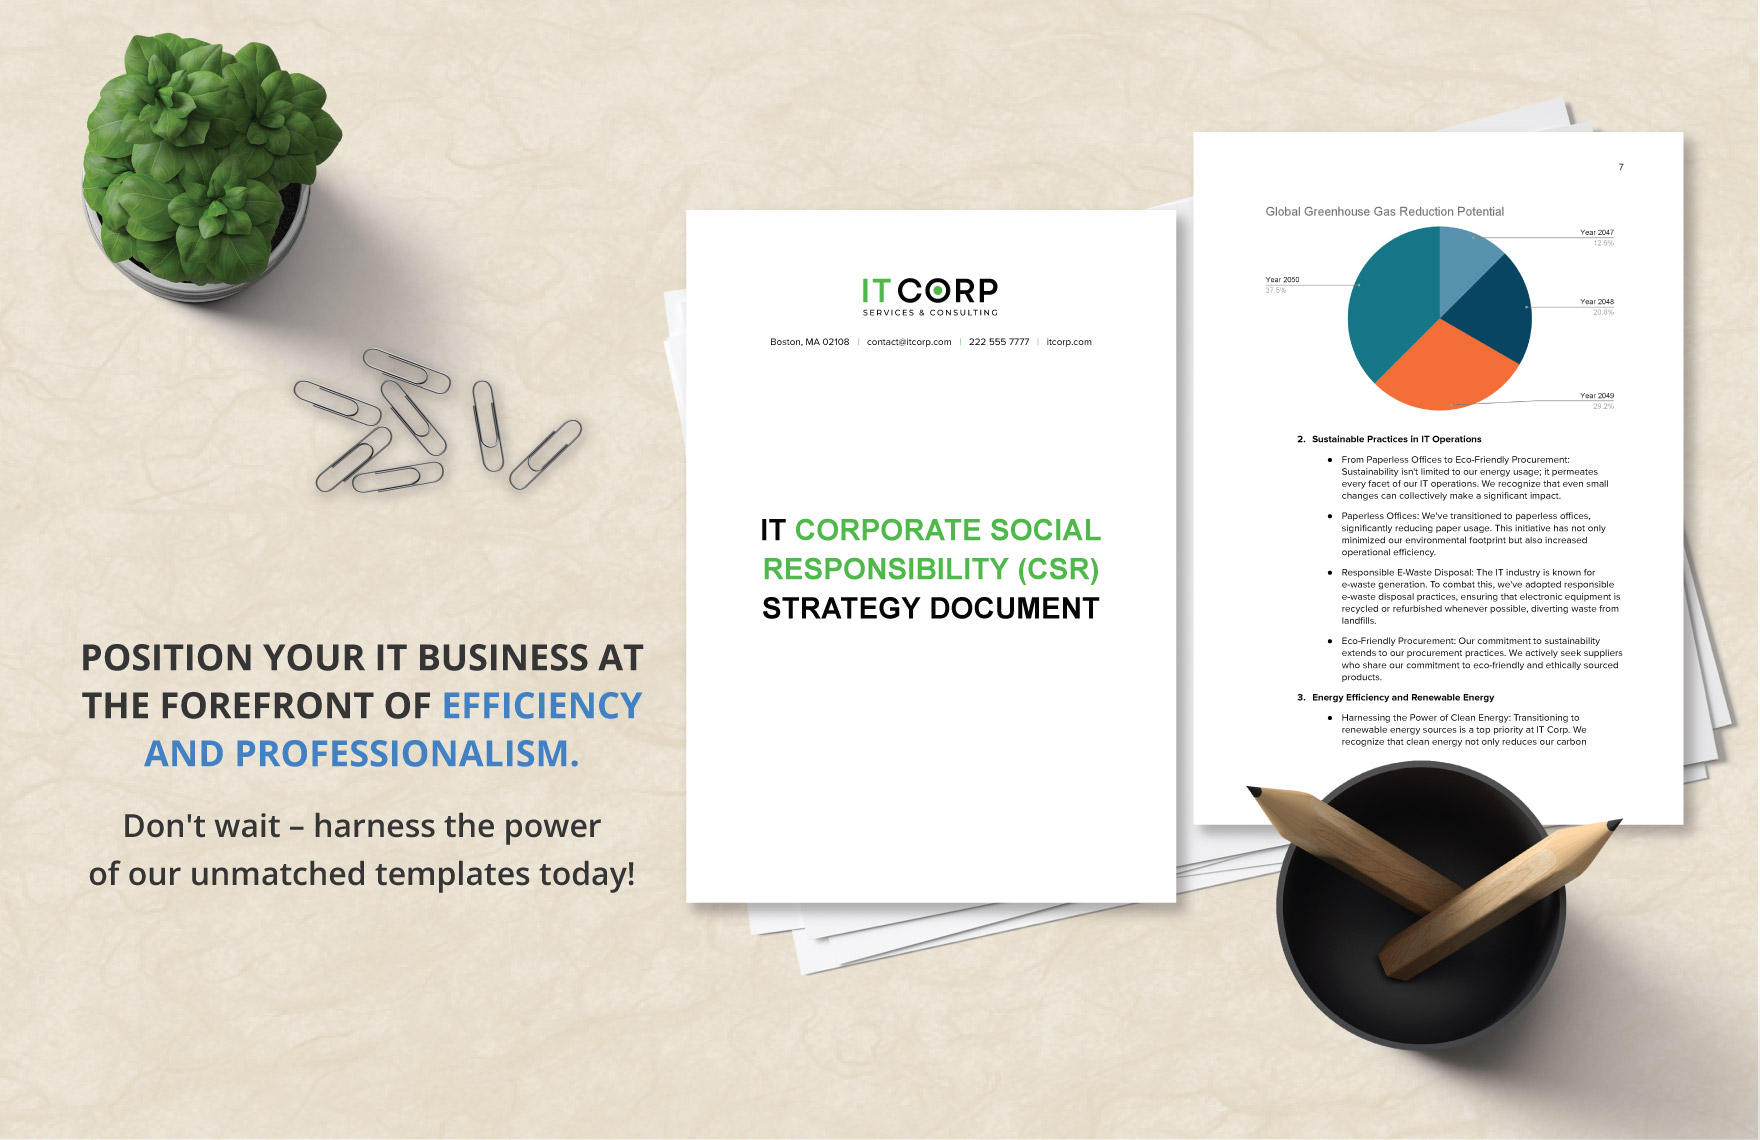 IT Corporate Social Responsibility (CSR) Strategy Document Template